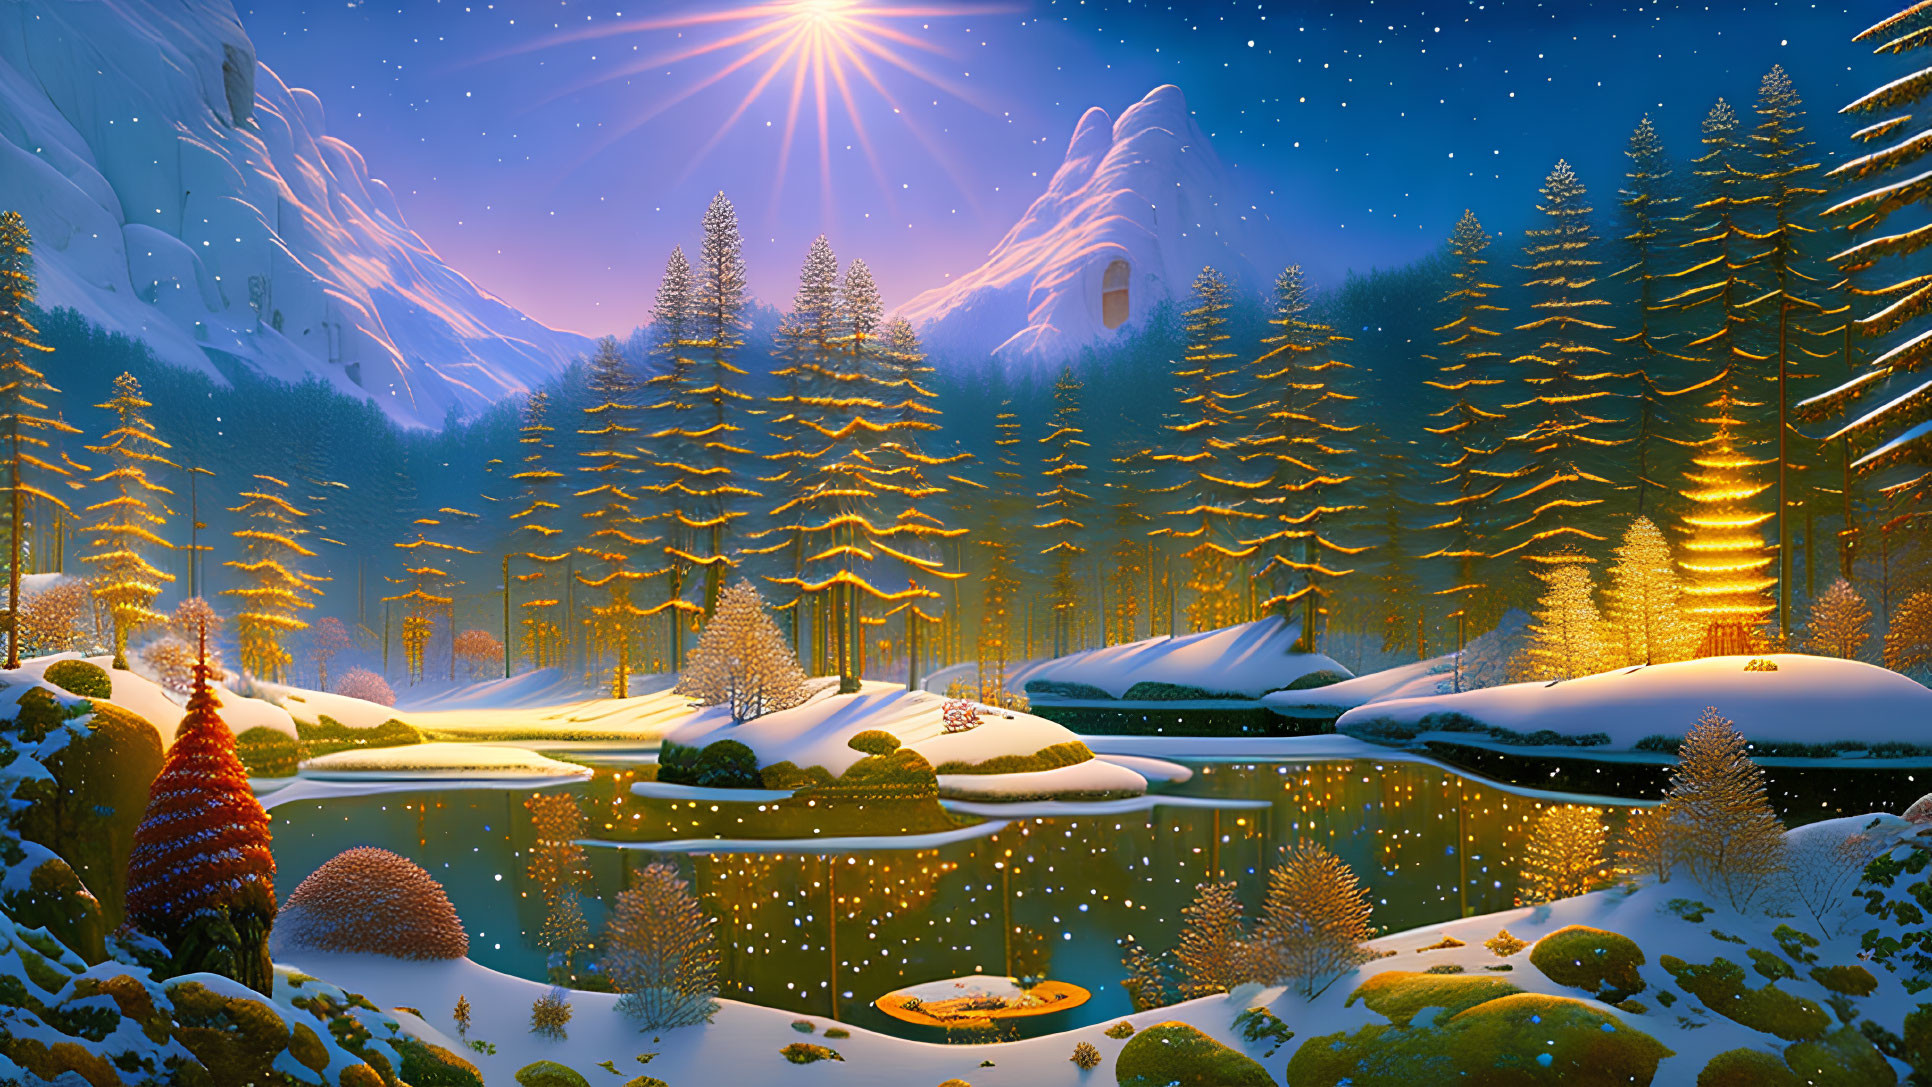 Snow-covered trees, calm lake, starry sky: Serene winter landscape with warm lights.